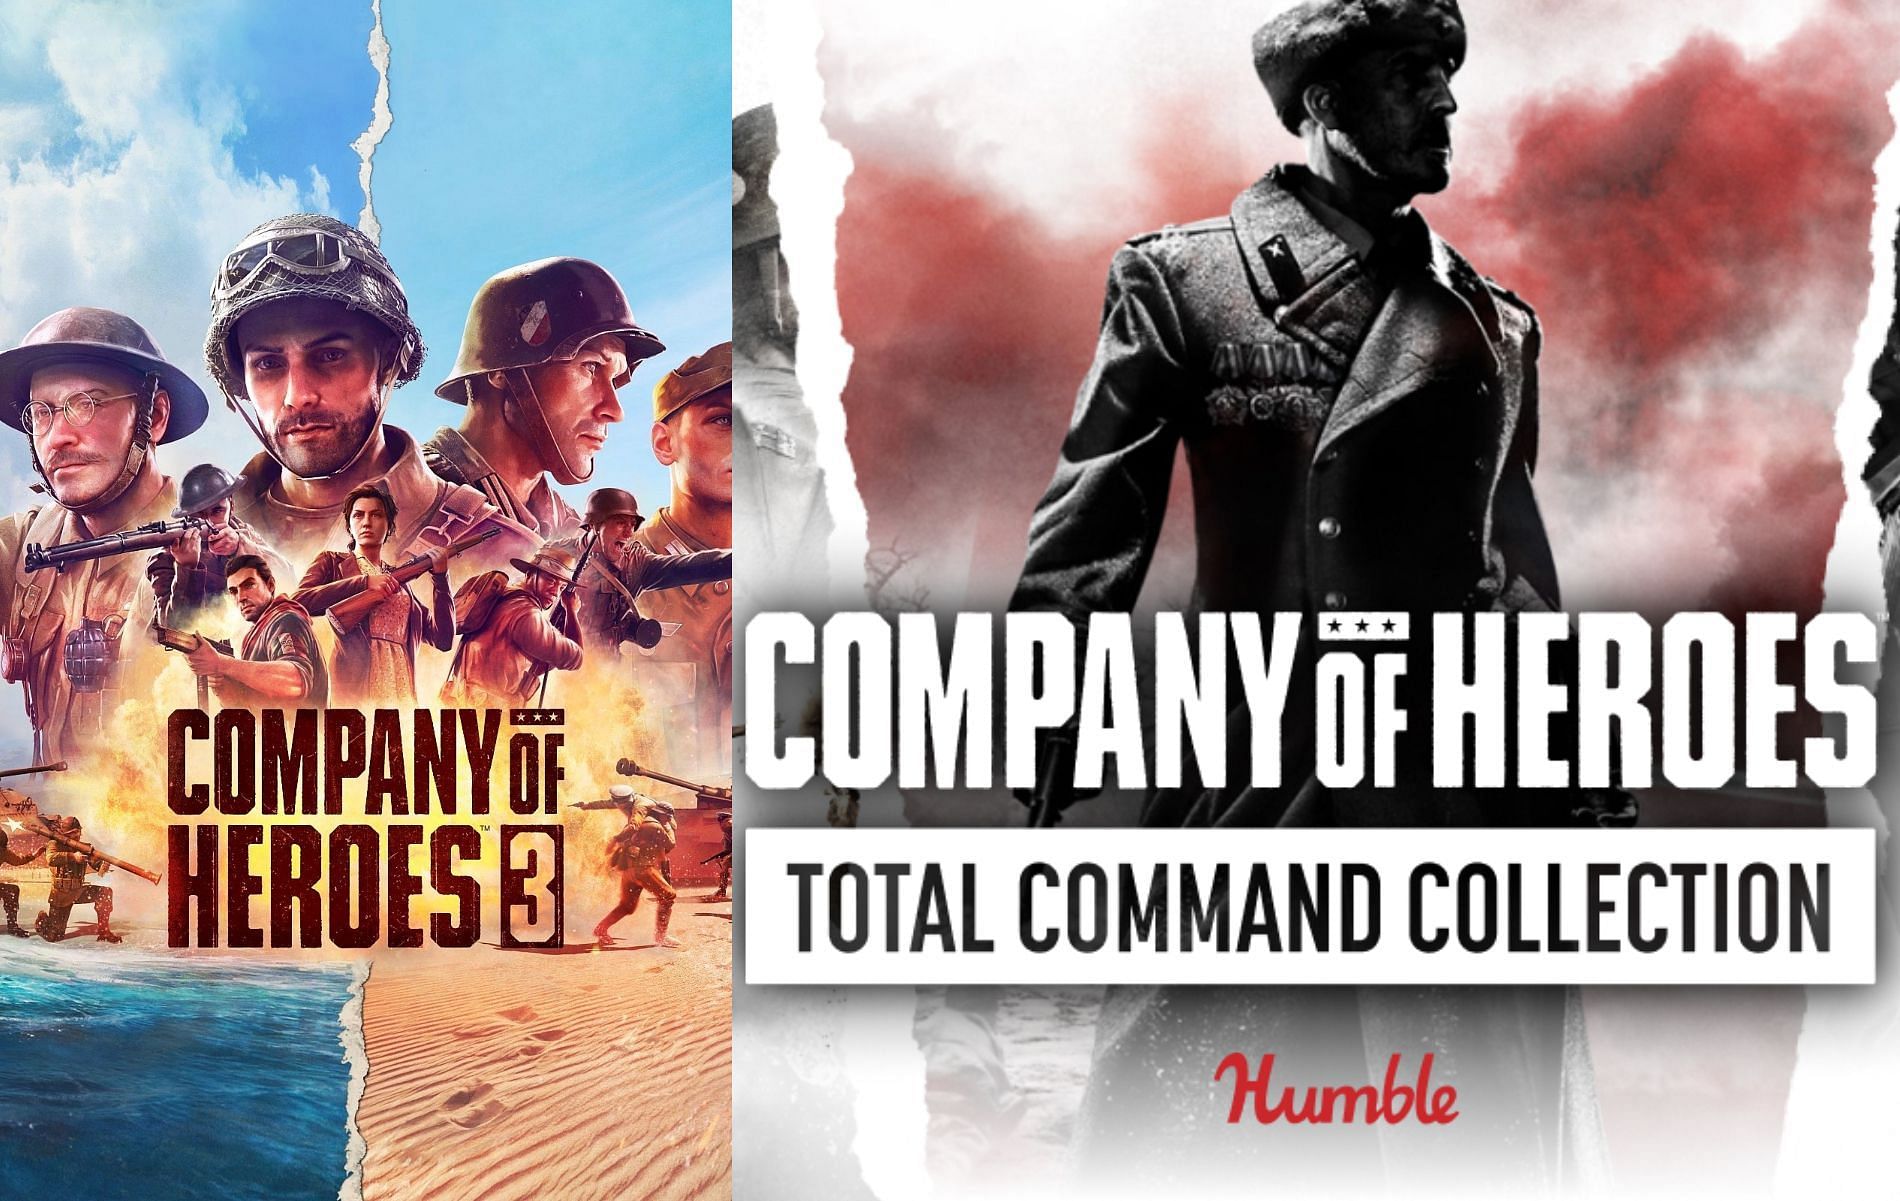 Company of Heroes is back in the spotlight (Images via SEGA)